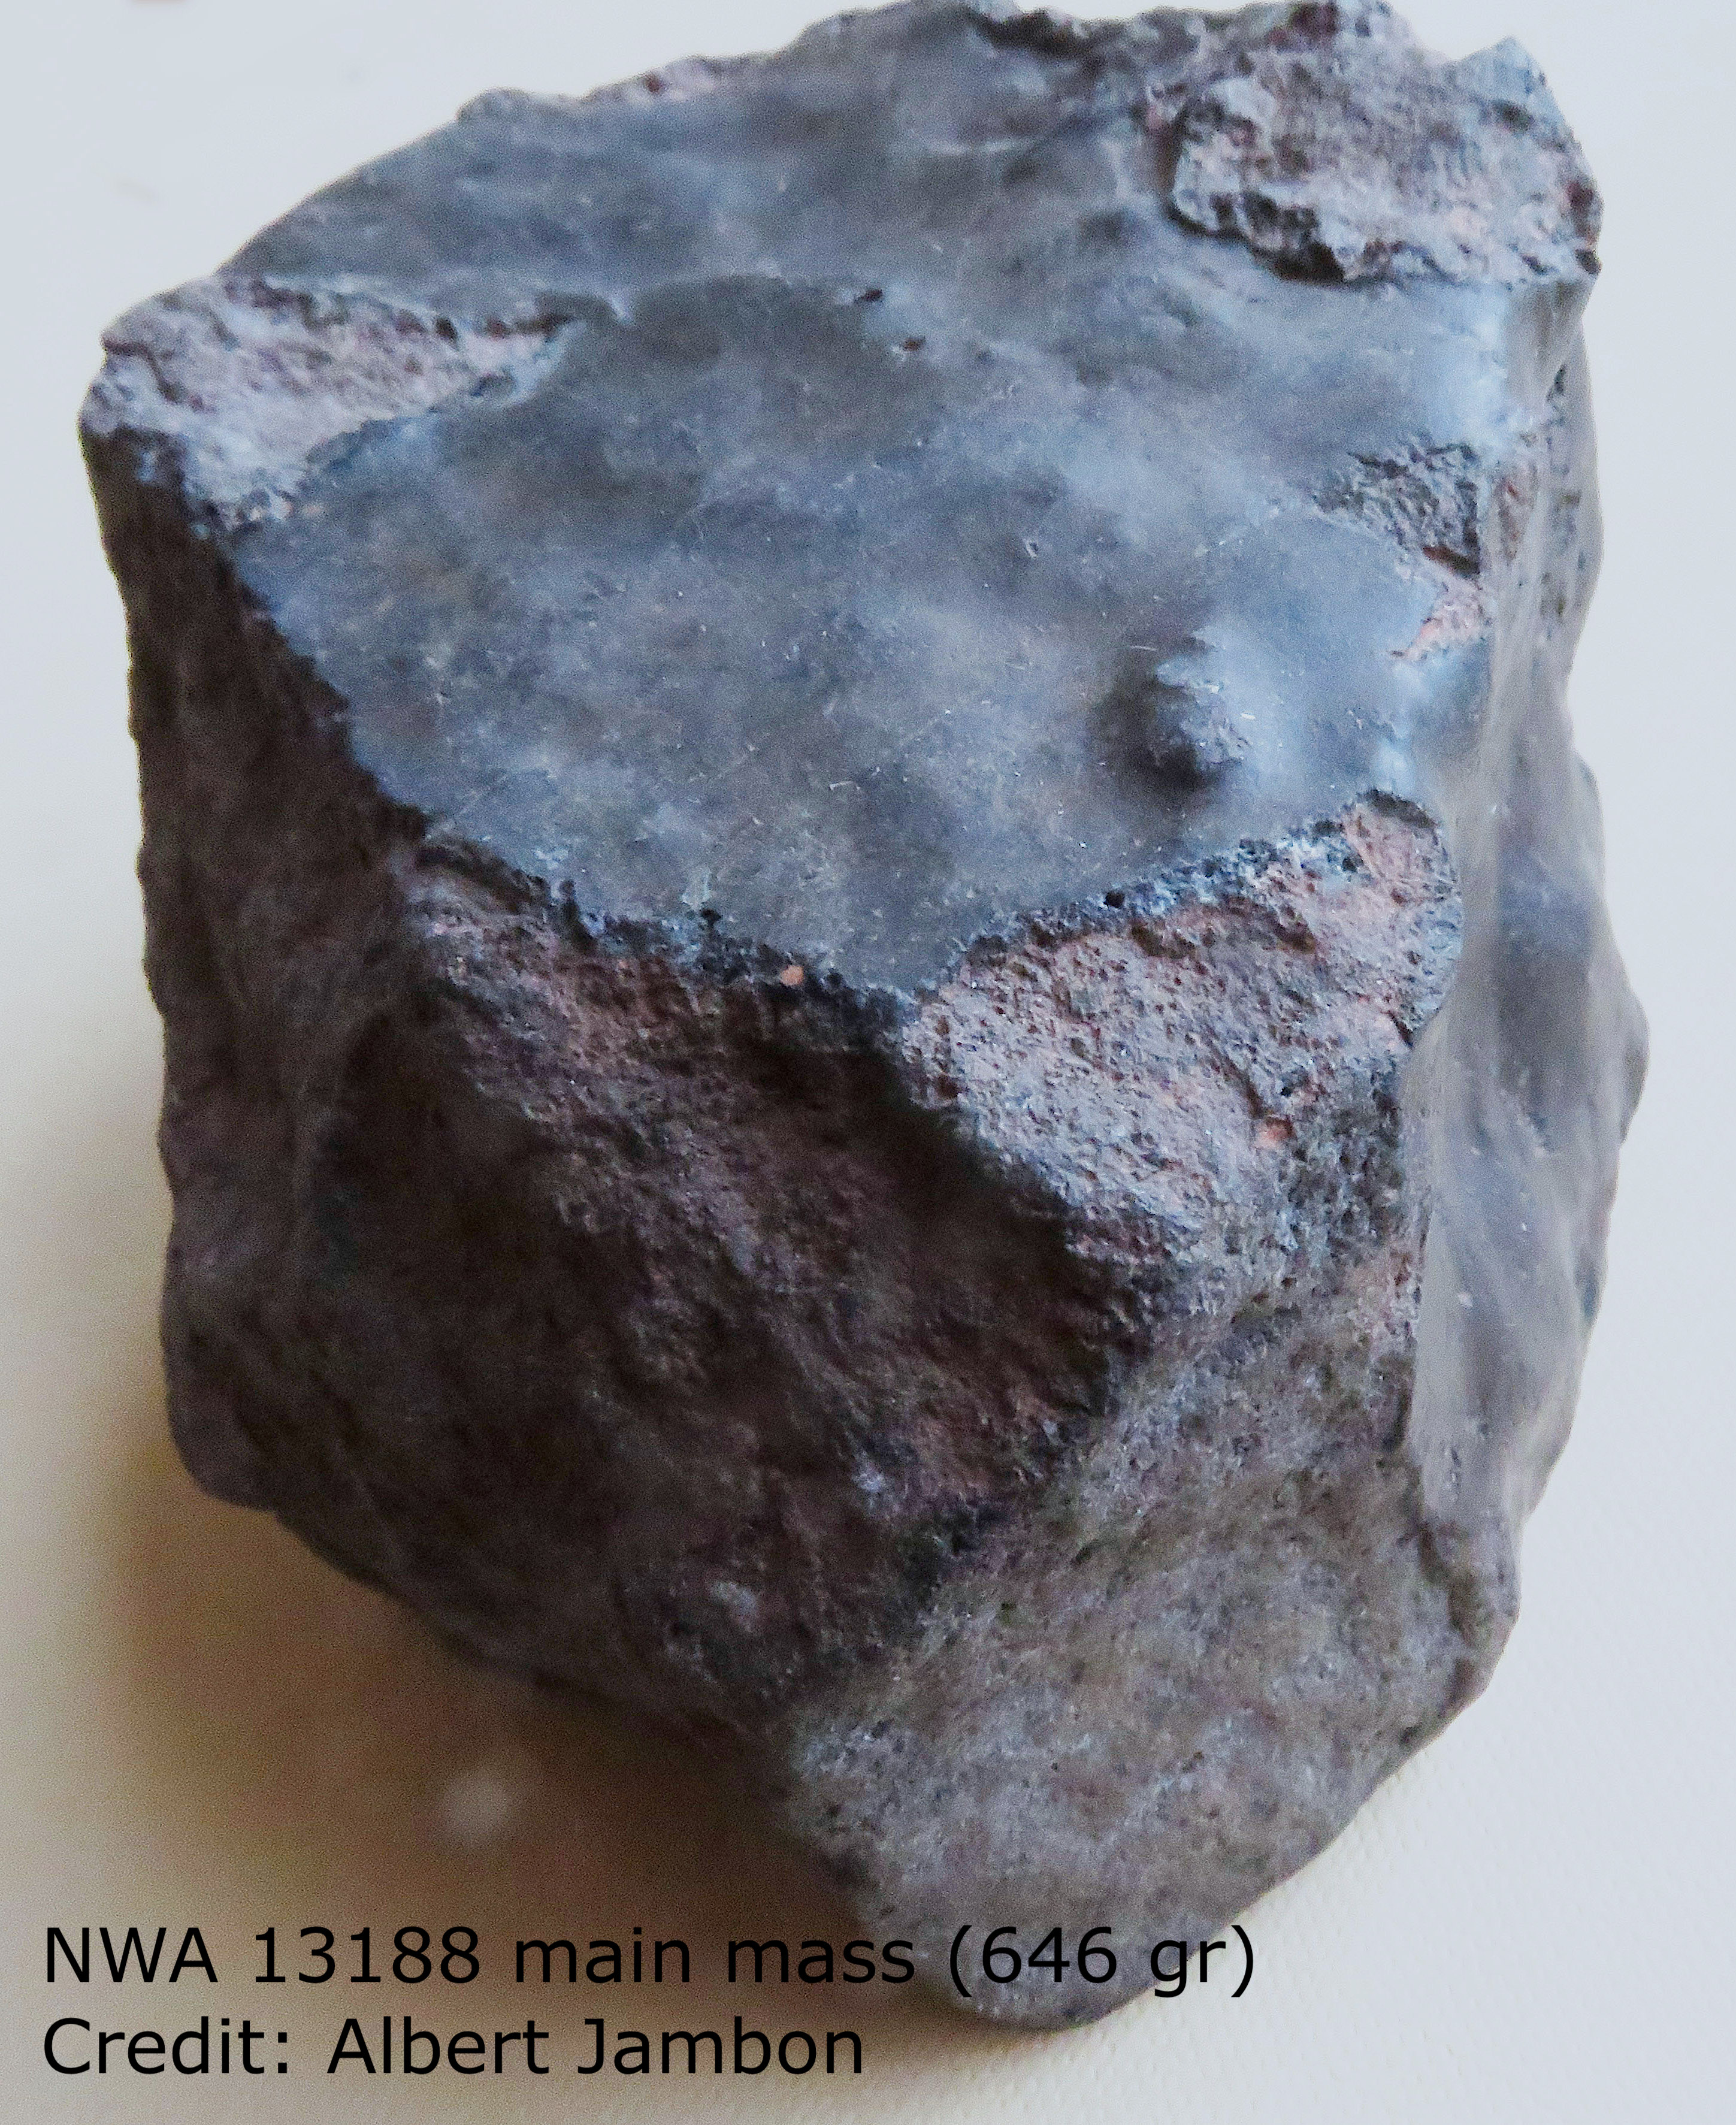 A complete picture of the space rock is shown in the title.